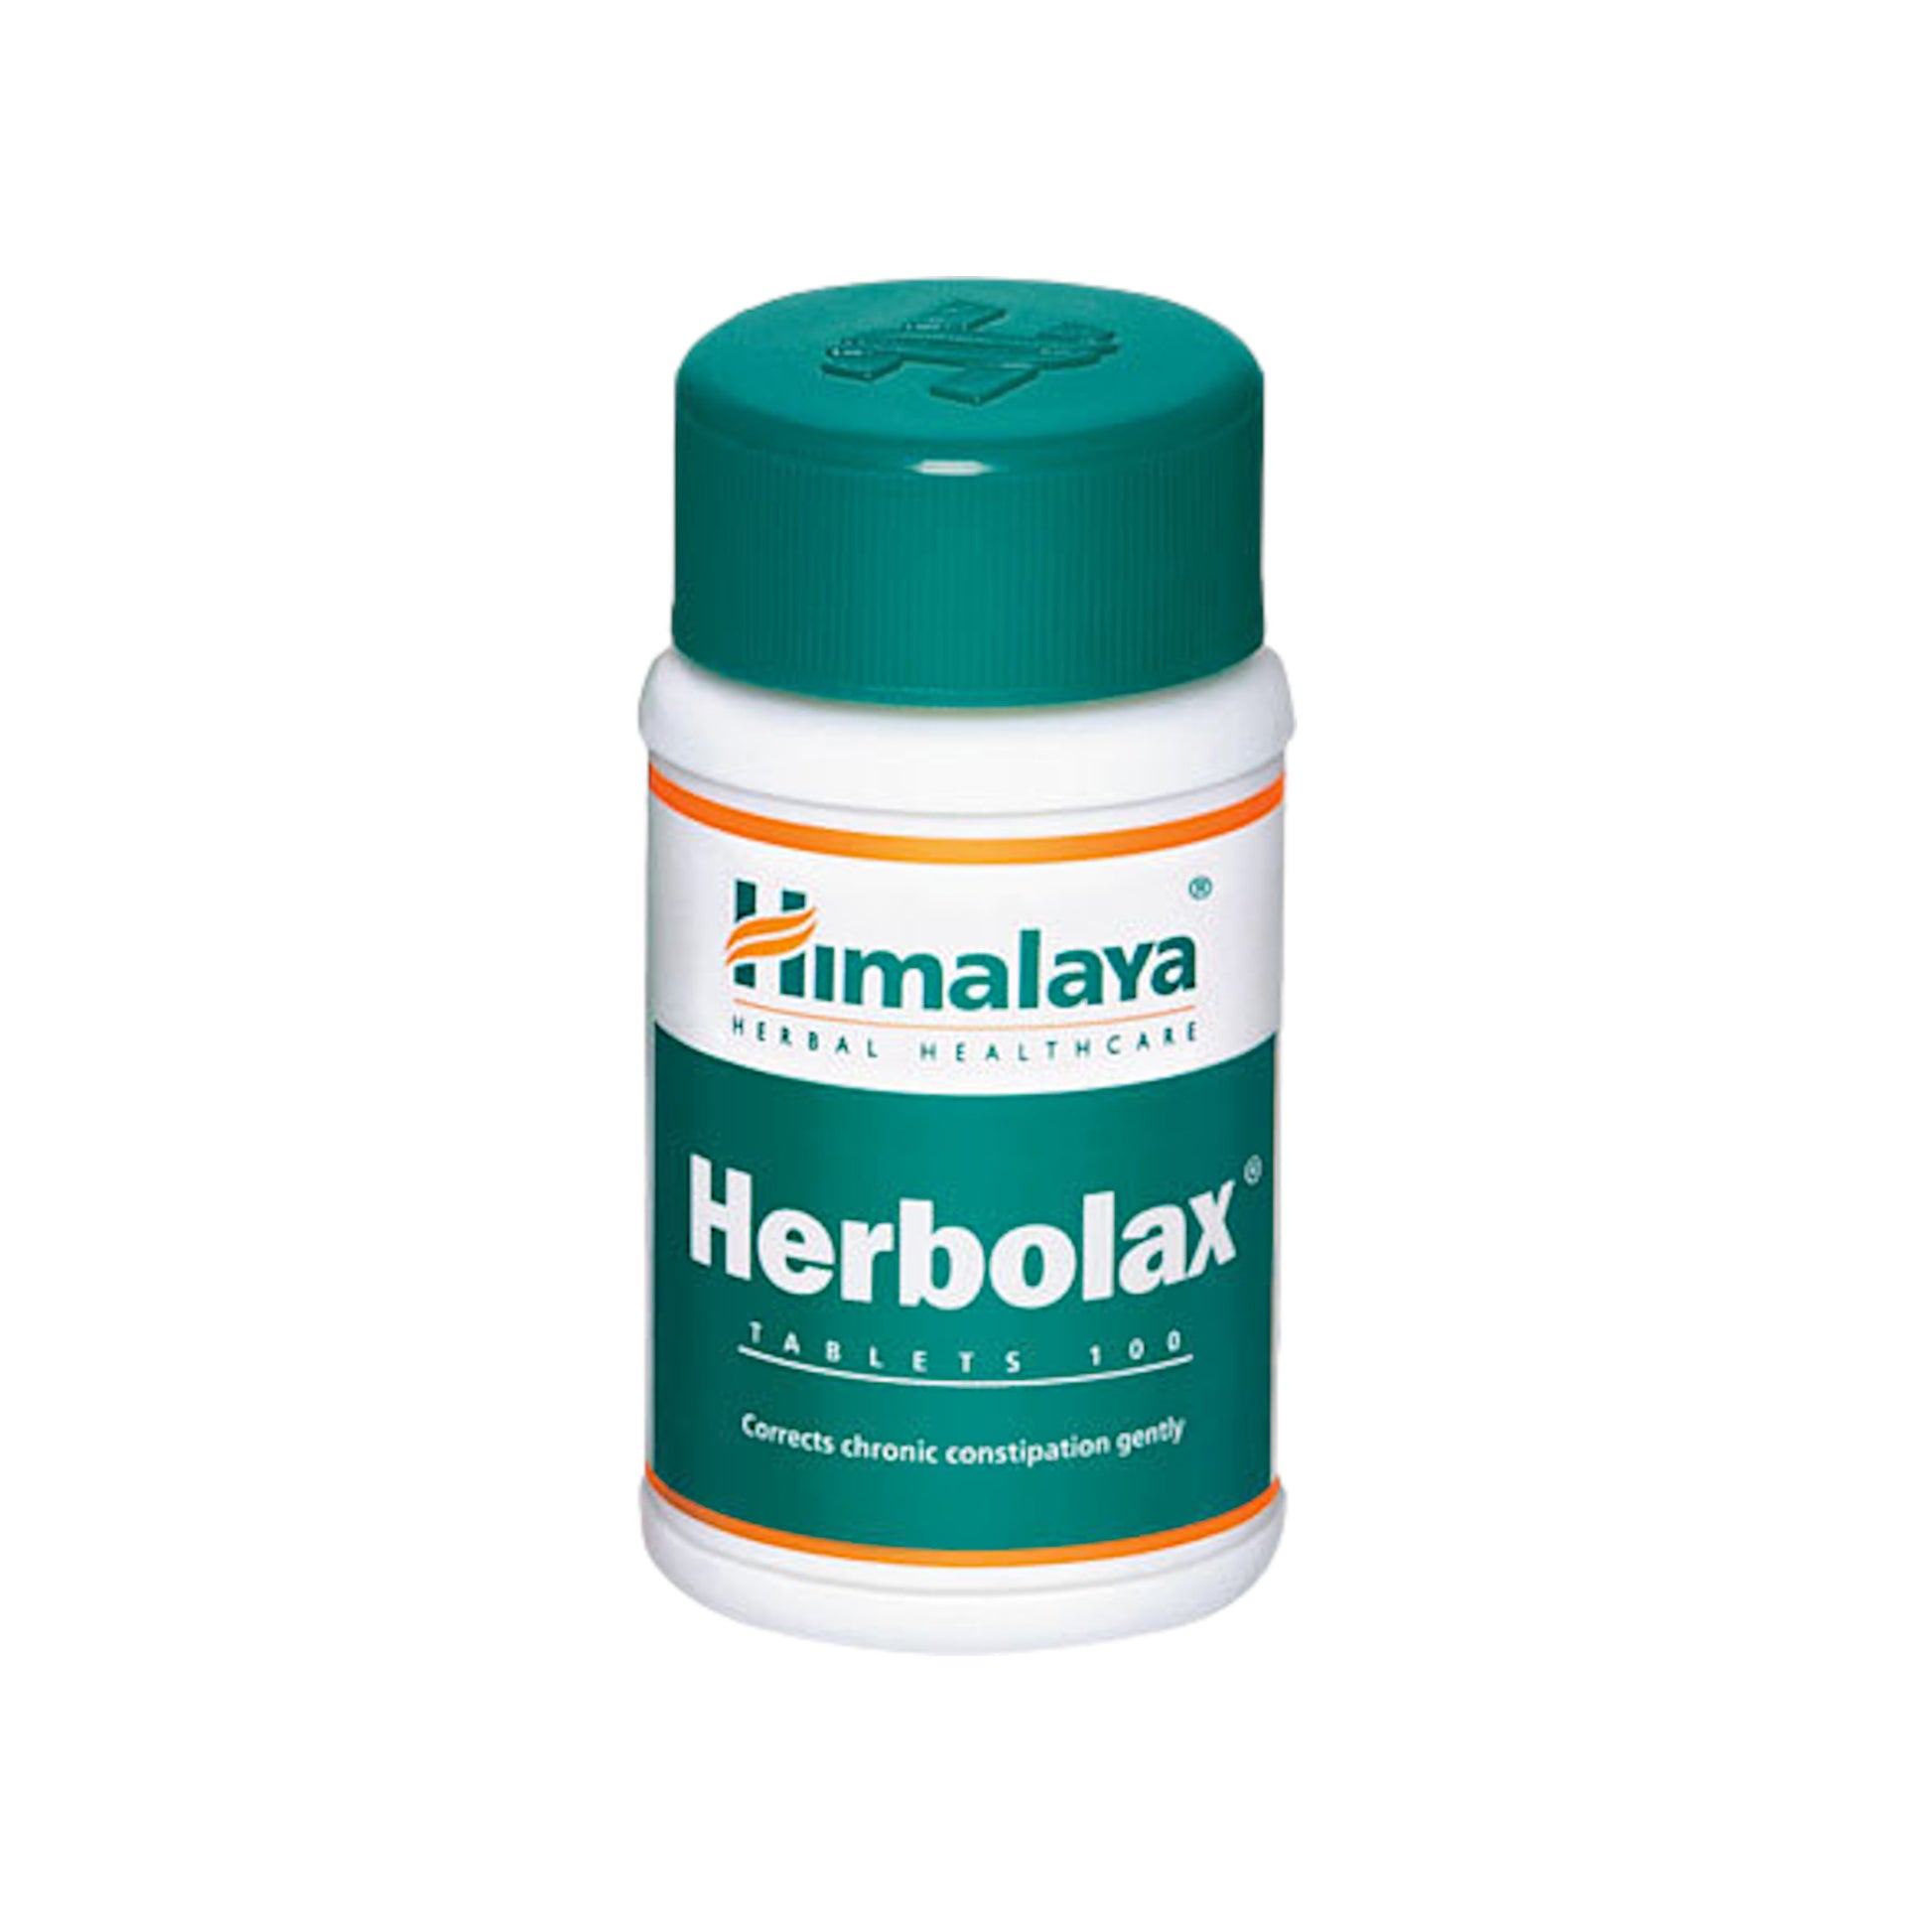 Image: Himalaya Herbolax 100 Tablets:  Remedy for chronic constipation, safe, non-habit forming, and pregnancy-friendly.